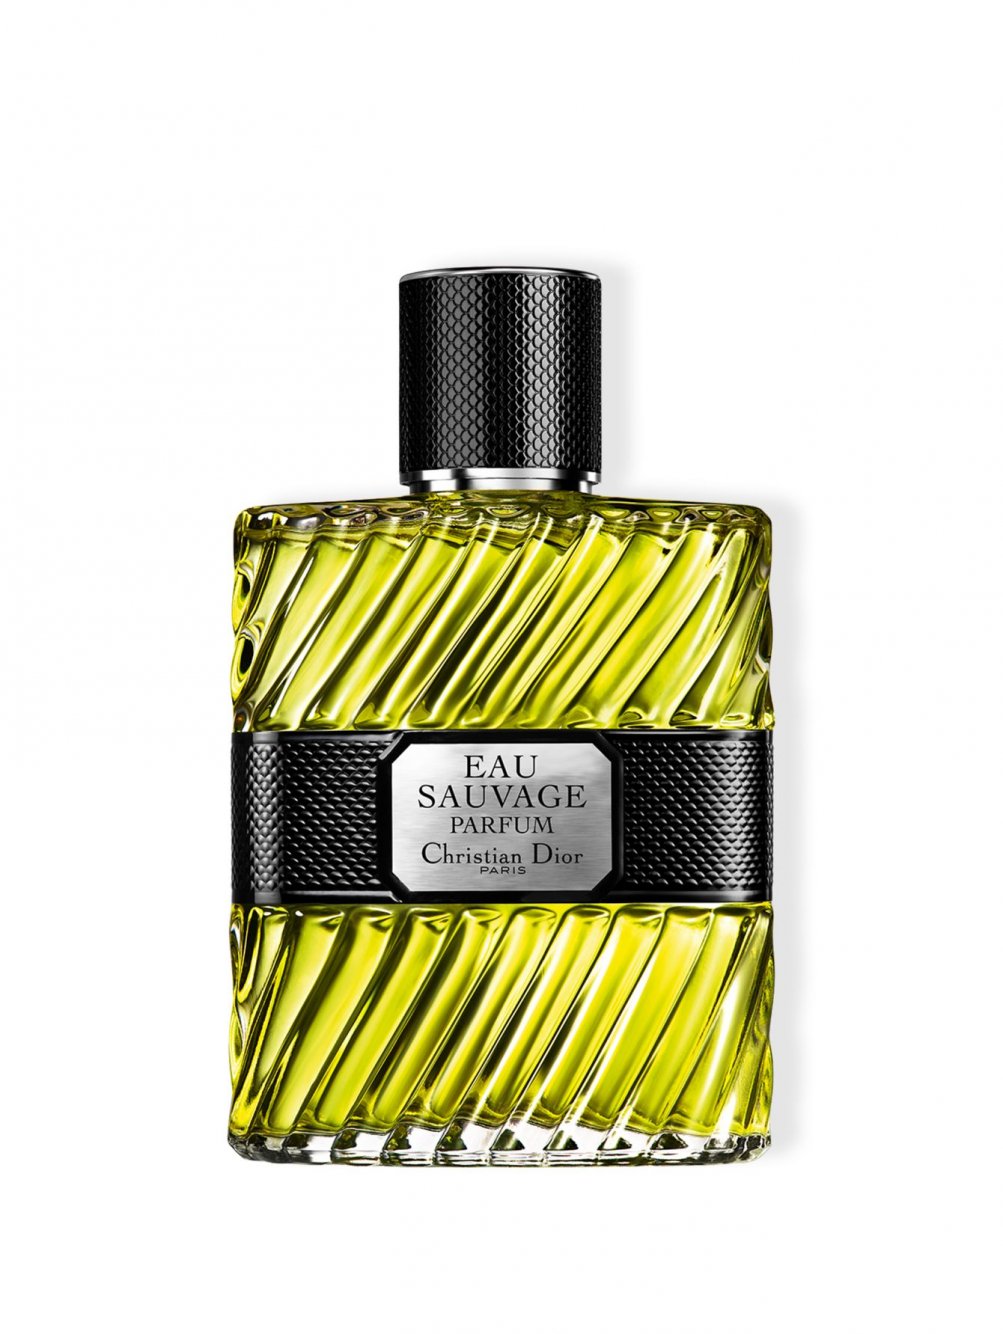 the new dior sauvage